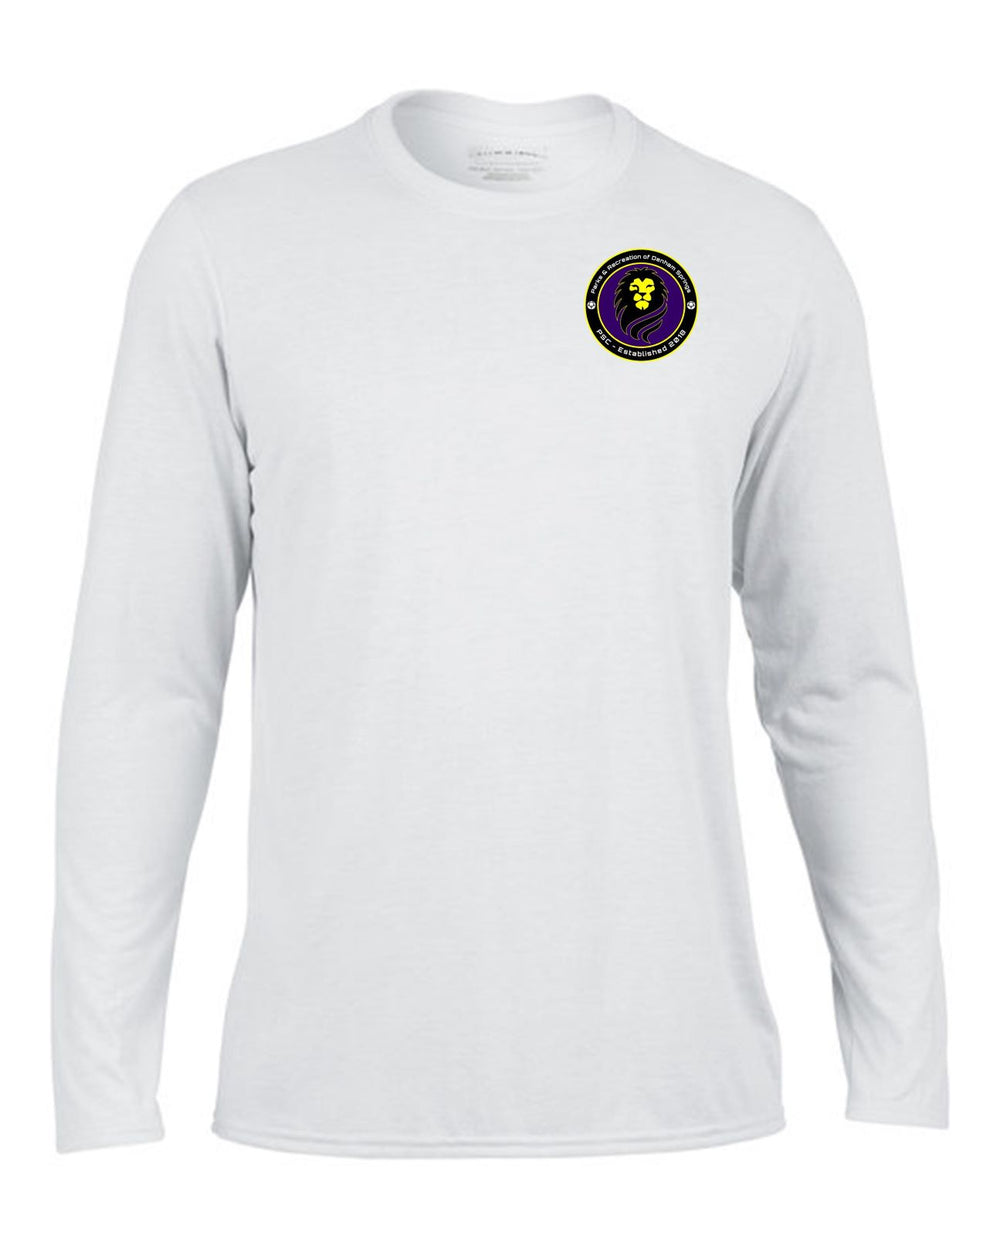 PARDS Long-Sleeve T-Shirt PARDS 2325 Mens Small White - Third Coast Soccer